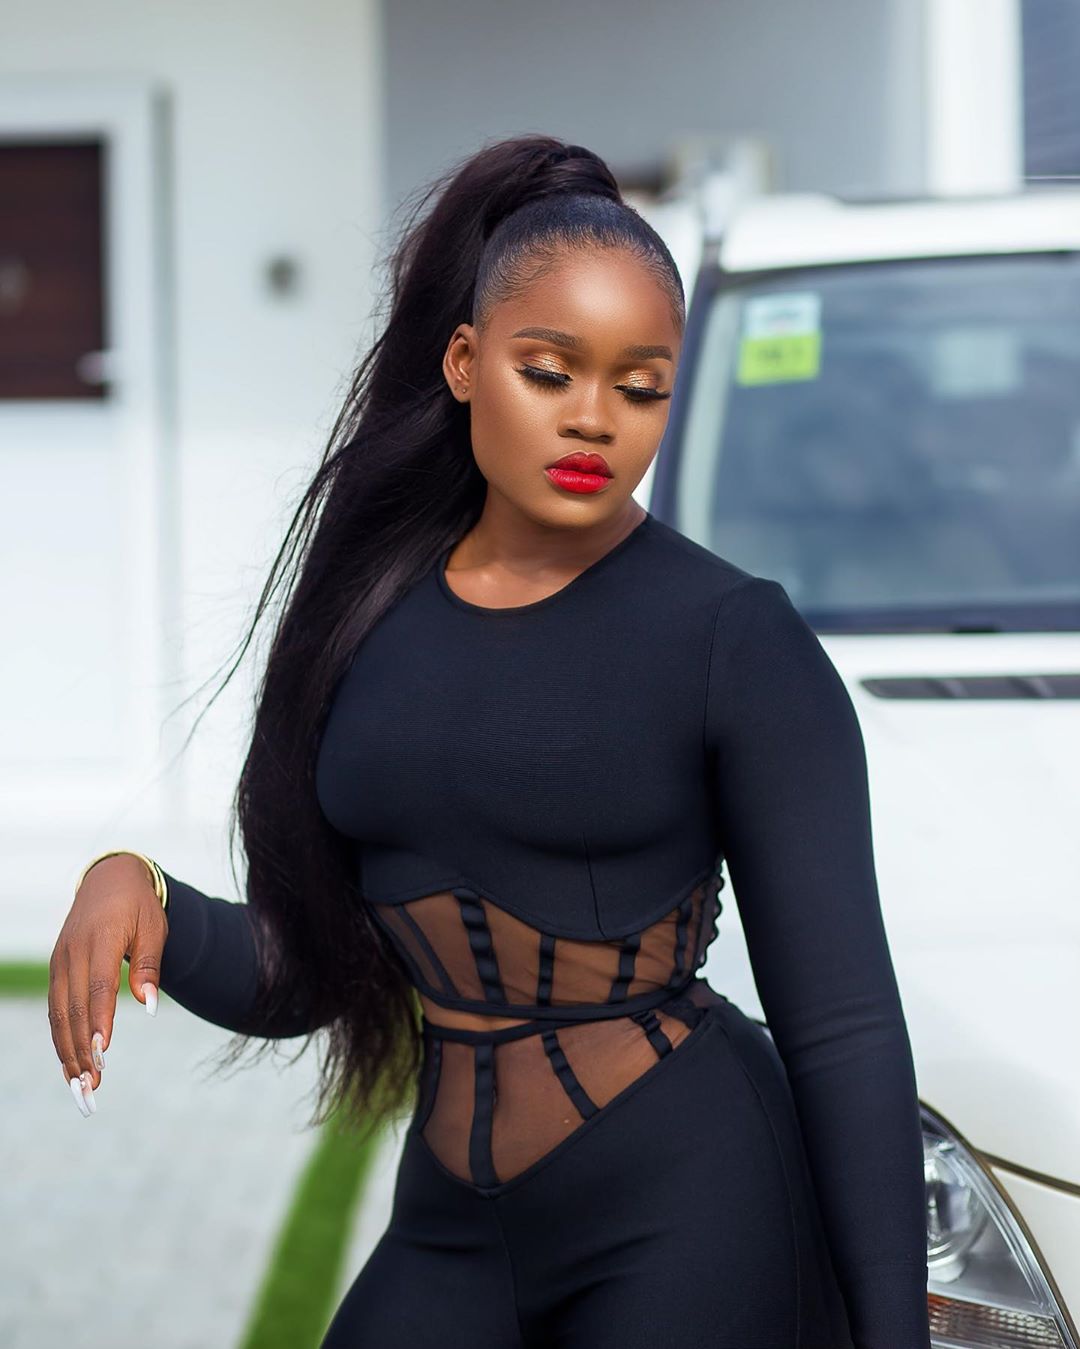 Reality TV Star, Cee-C Debuts Tiny Waist In Black Hugging Outfit (Photos)